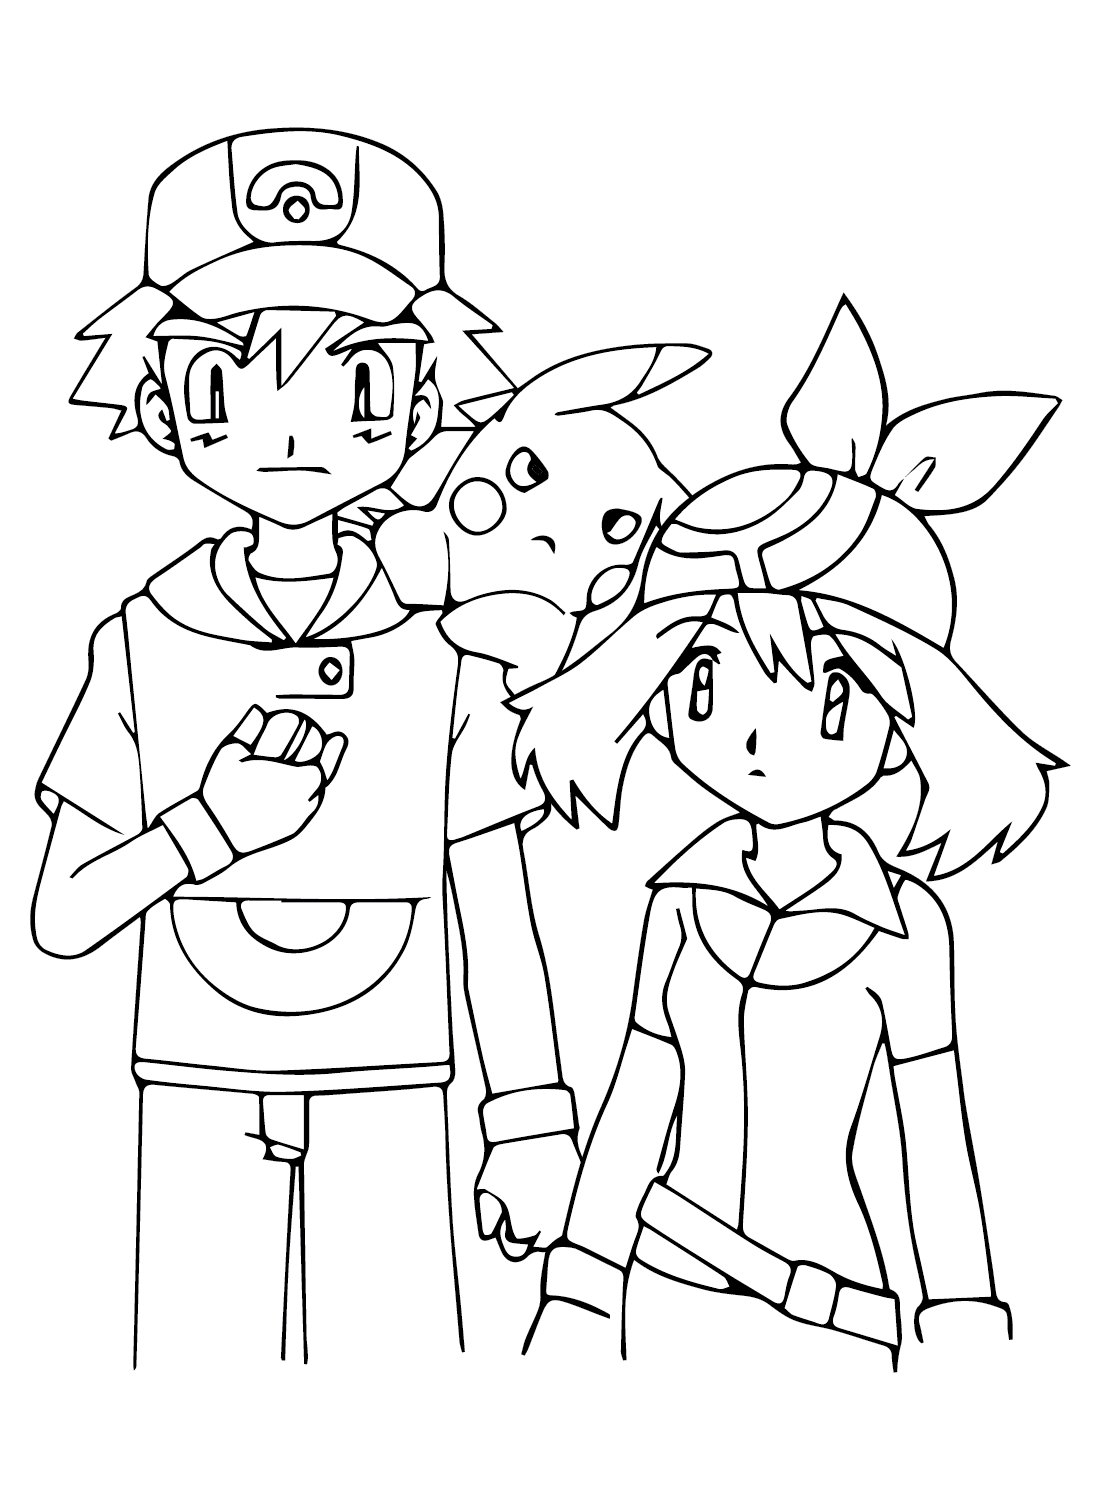 May and Ash Coloring Page from May Pokemon